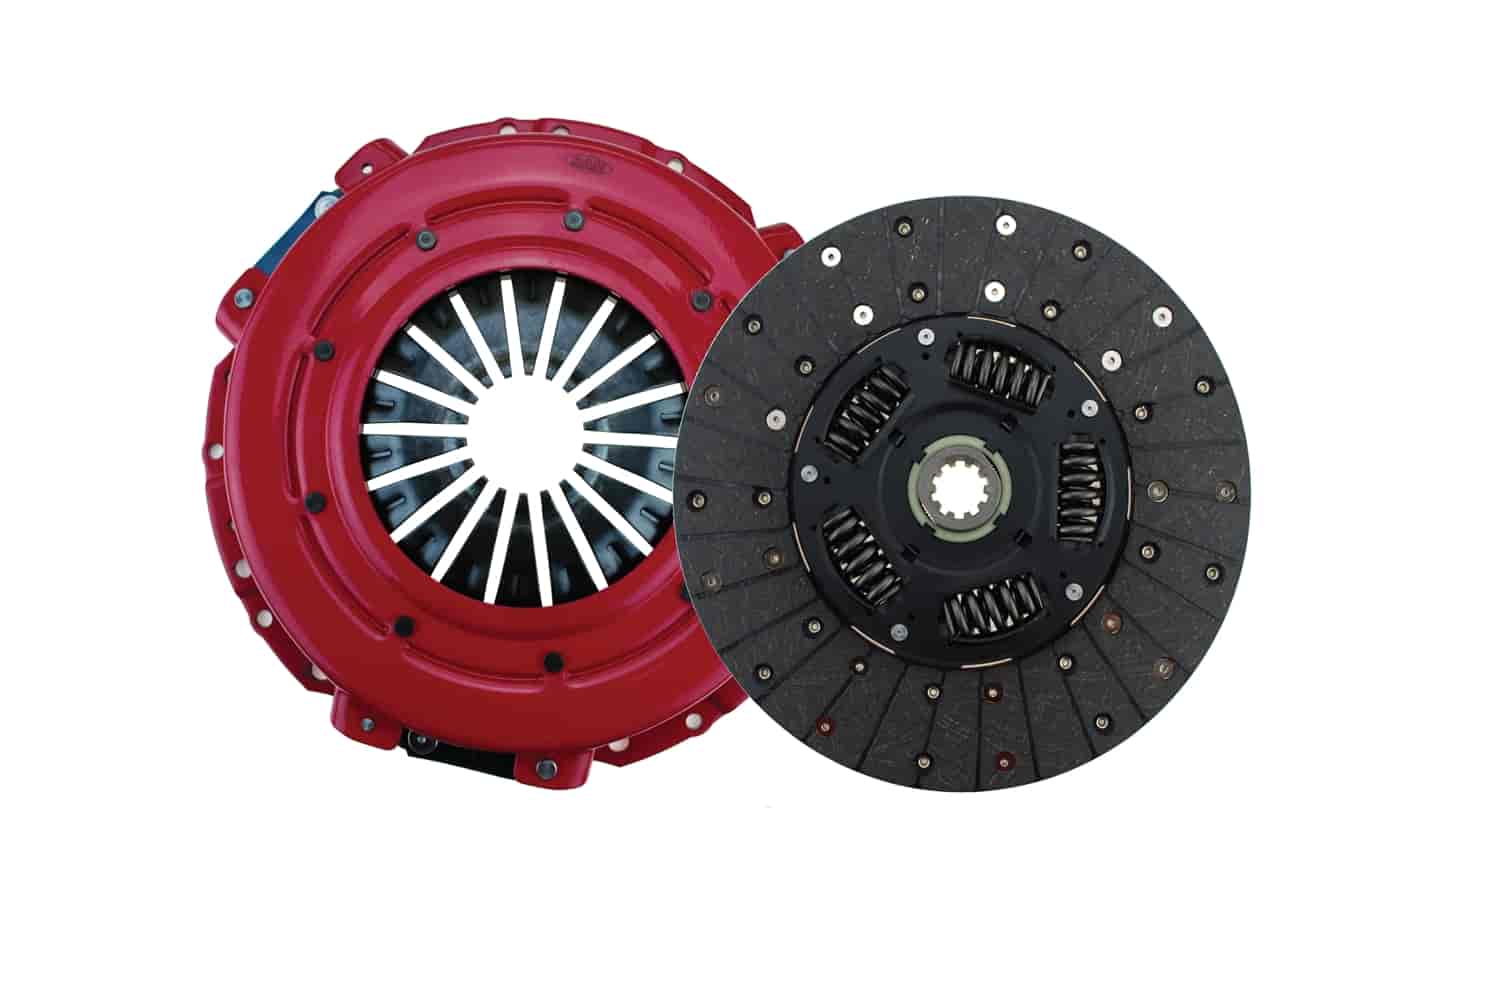 Premium OEM Replacement Clutch Kit 1999-2004 Ford Mustang 4.6L (8-Bolt Flywheel)